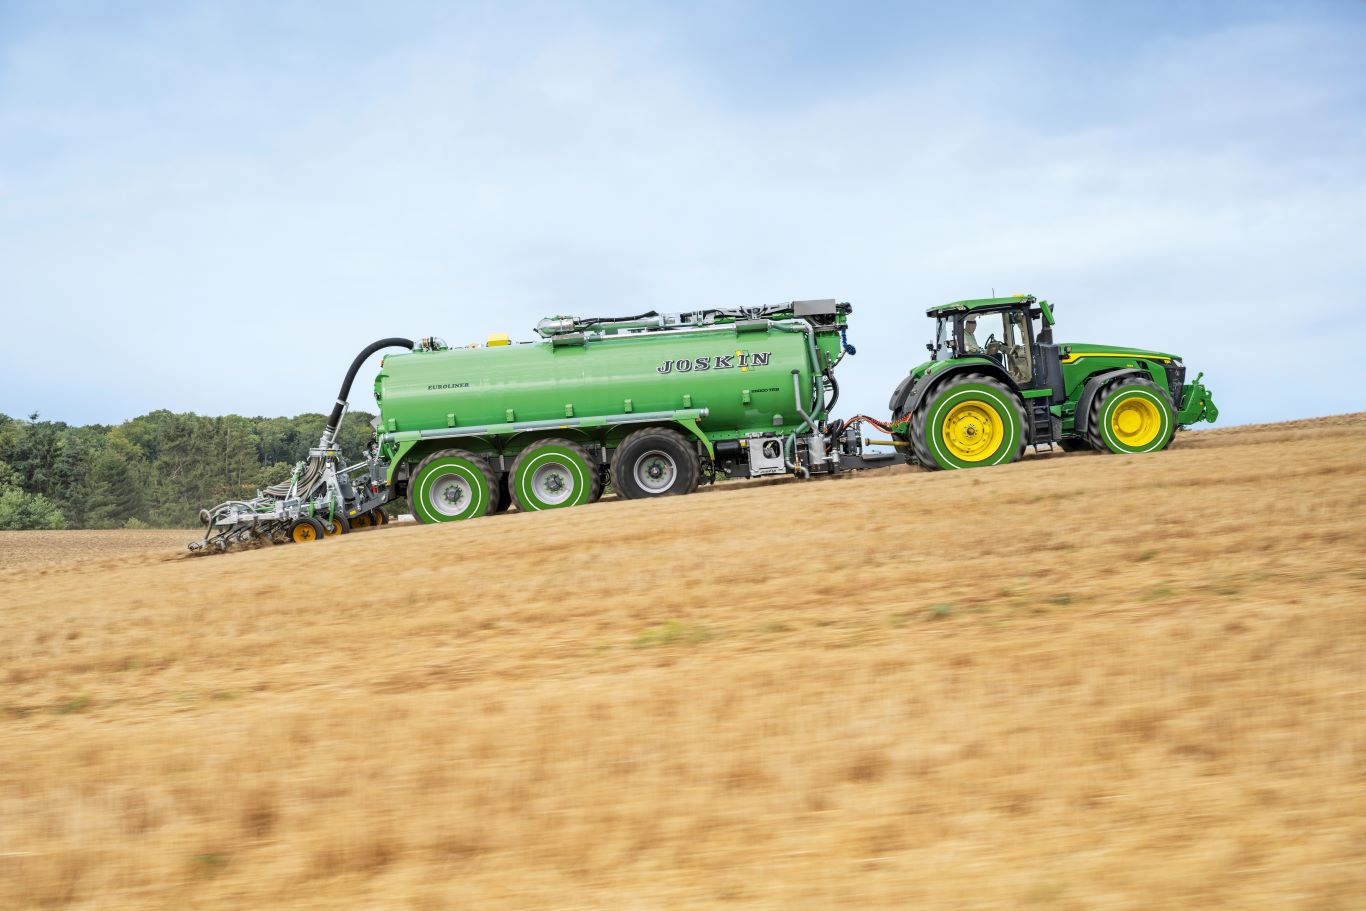 8R and Joskin – In combination with the Joskin axle drive, two axles of the slurry tanker are driven electrically and thus the weight of the tanker is utilised for traction